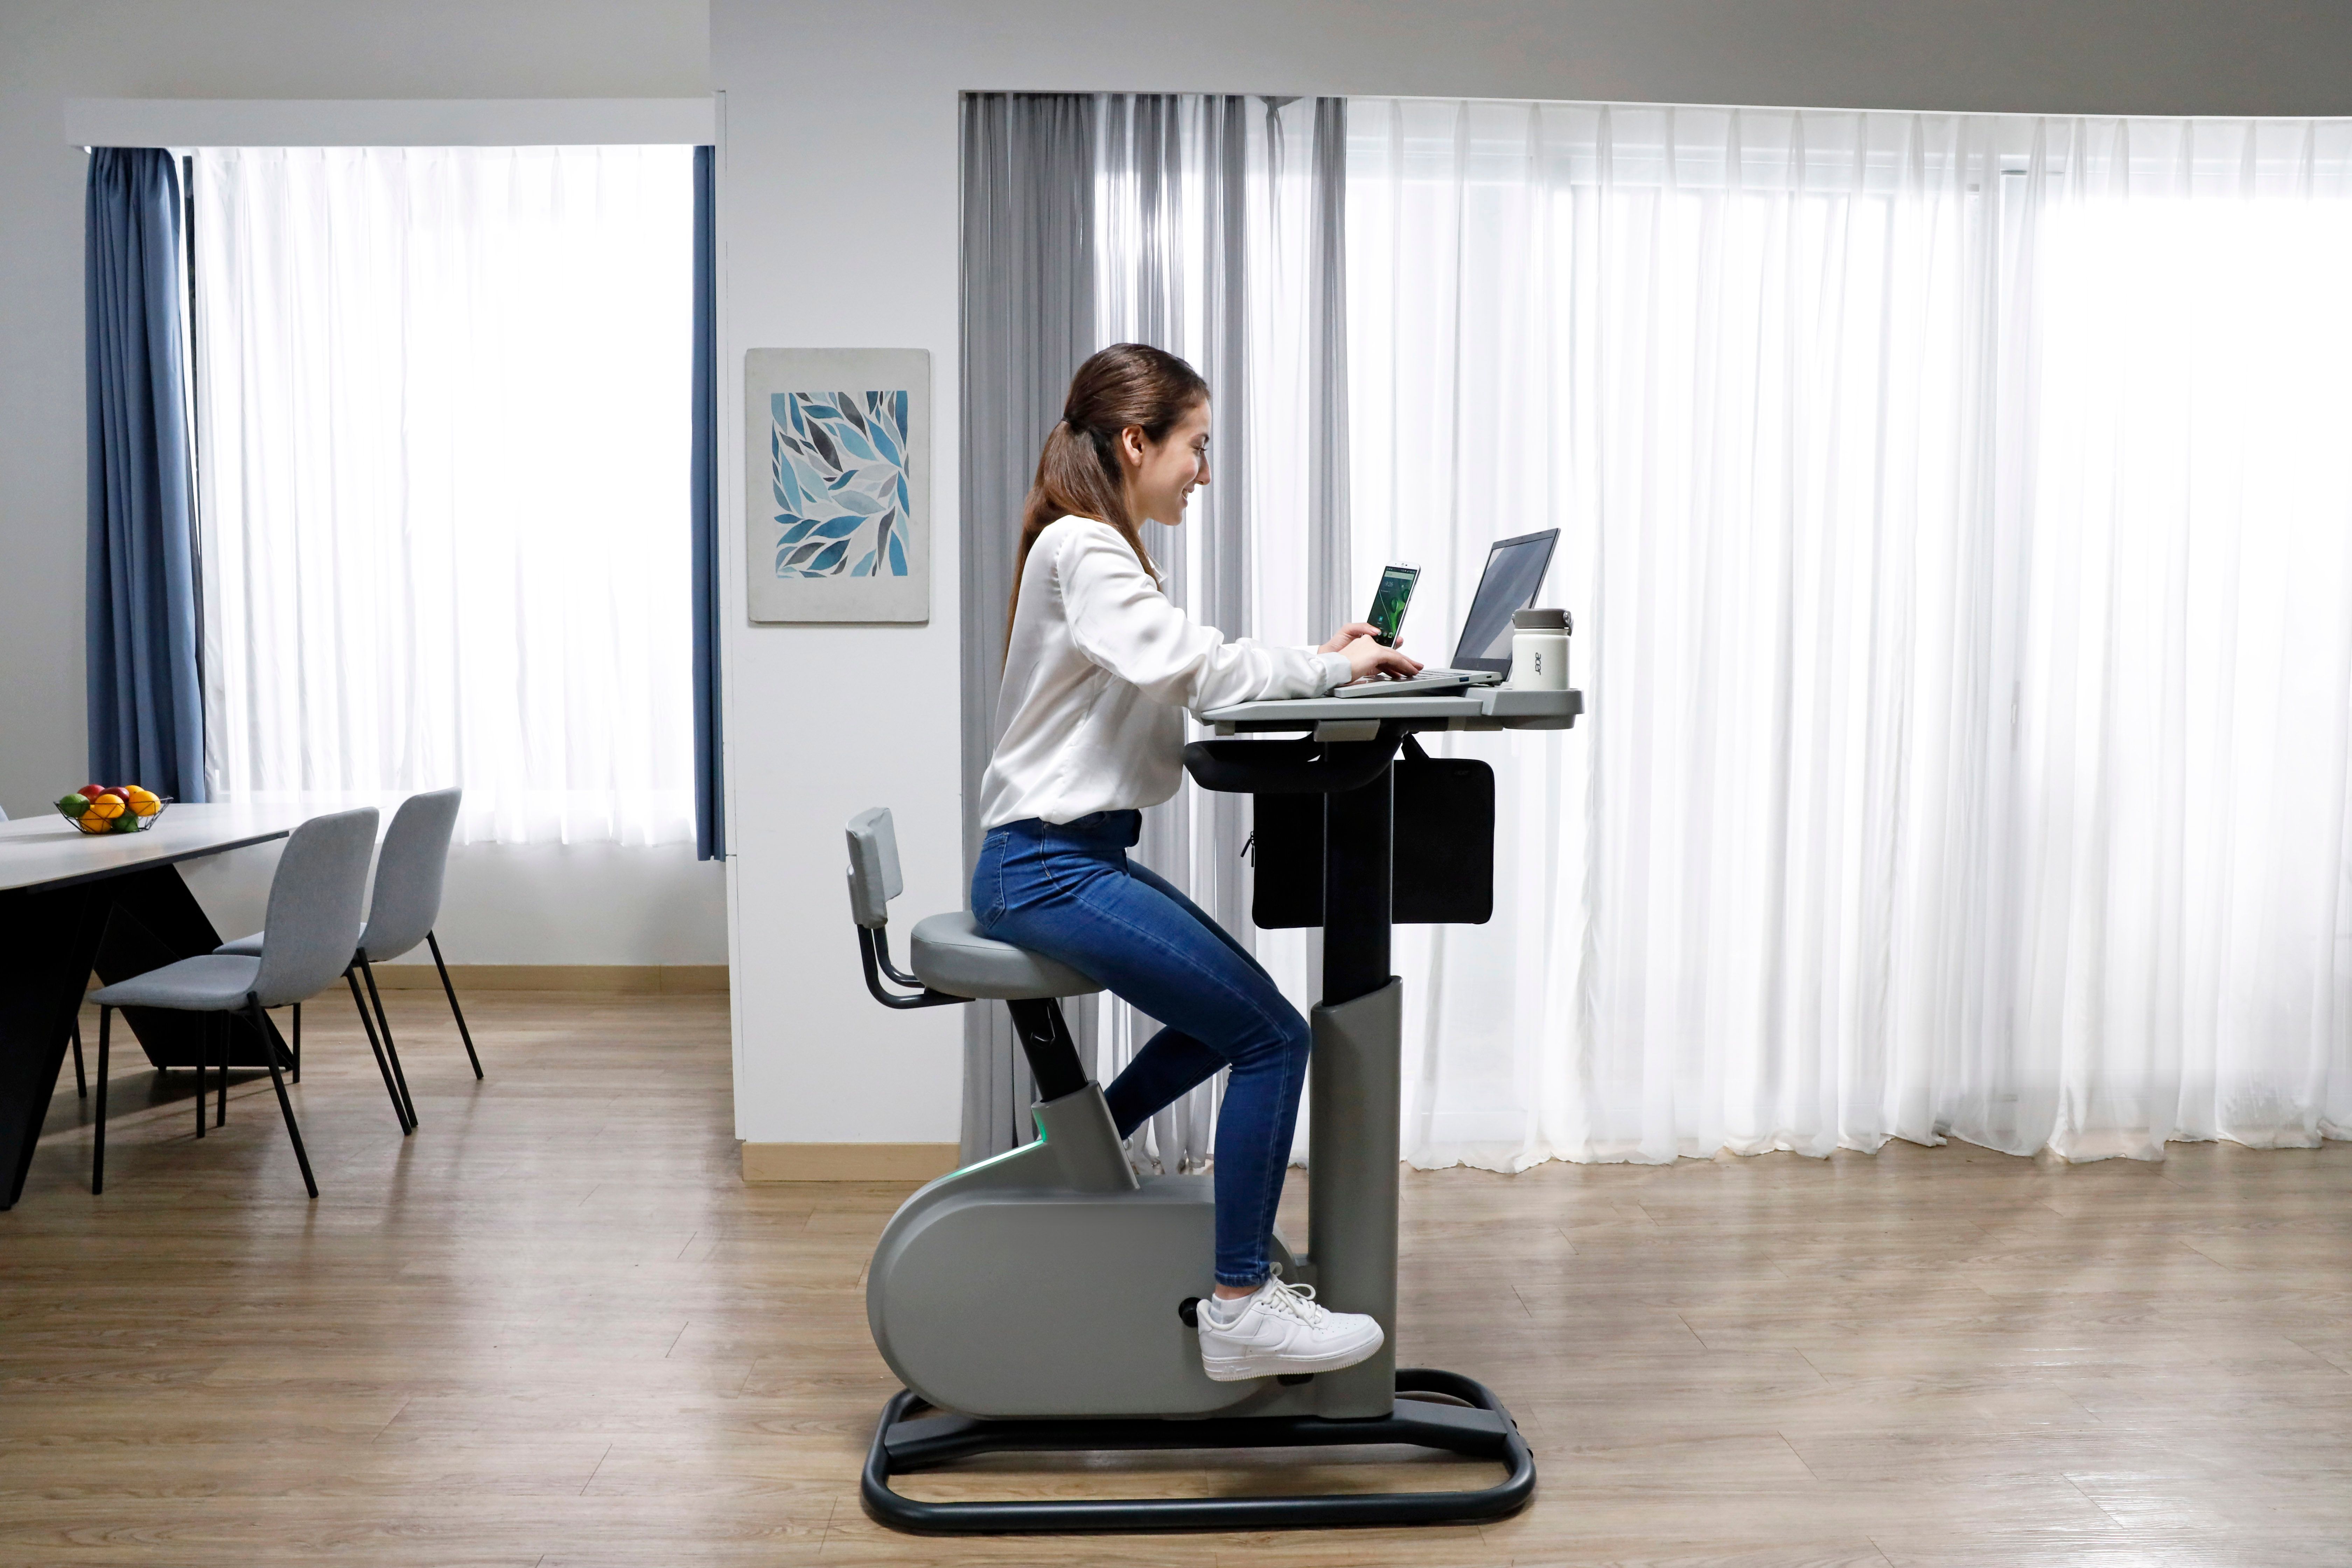 A woman sitting on the eKinect Bike Desk with the desk pulled closer to the seat. The desk has a laptop and a phone on it, which the woman is using to work.